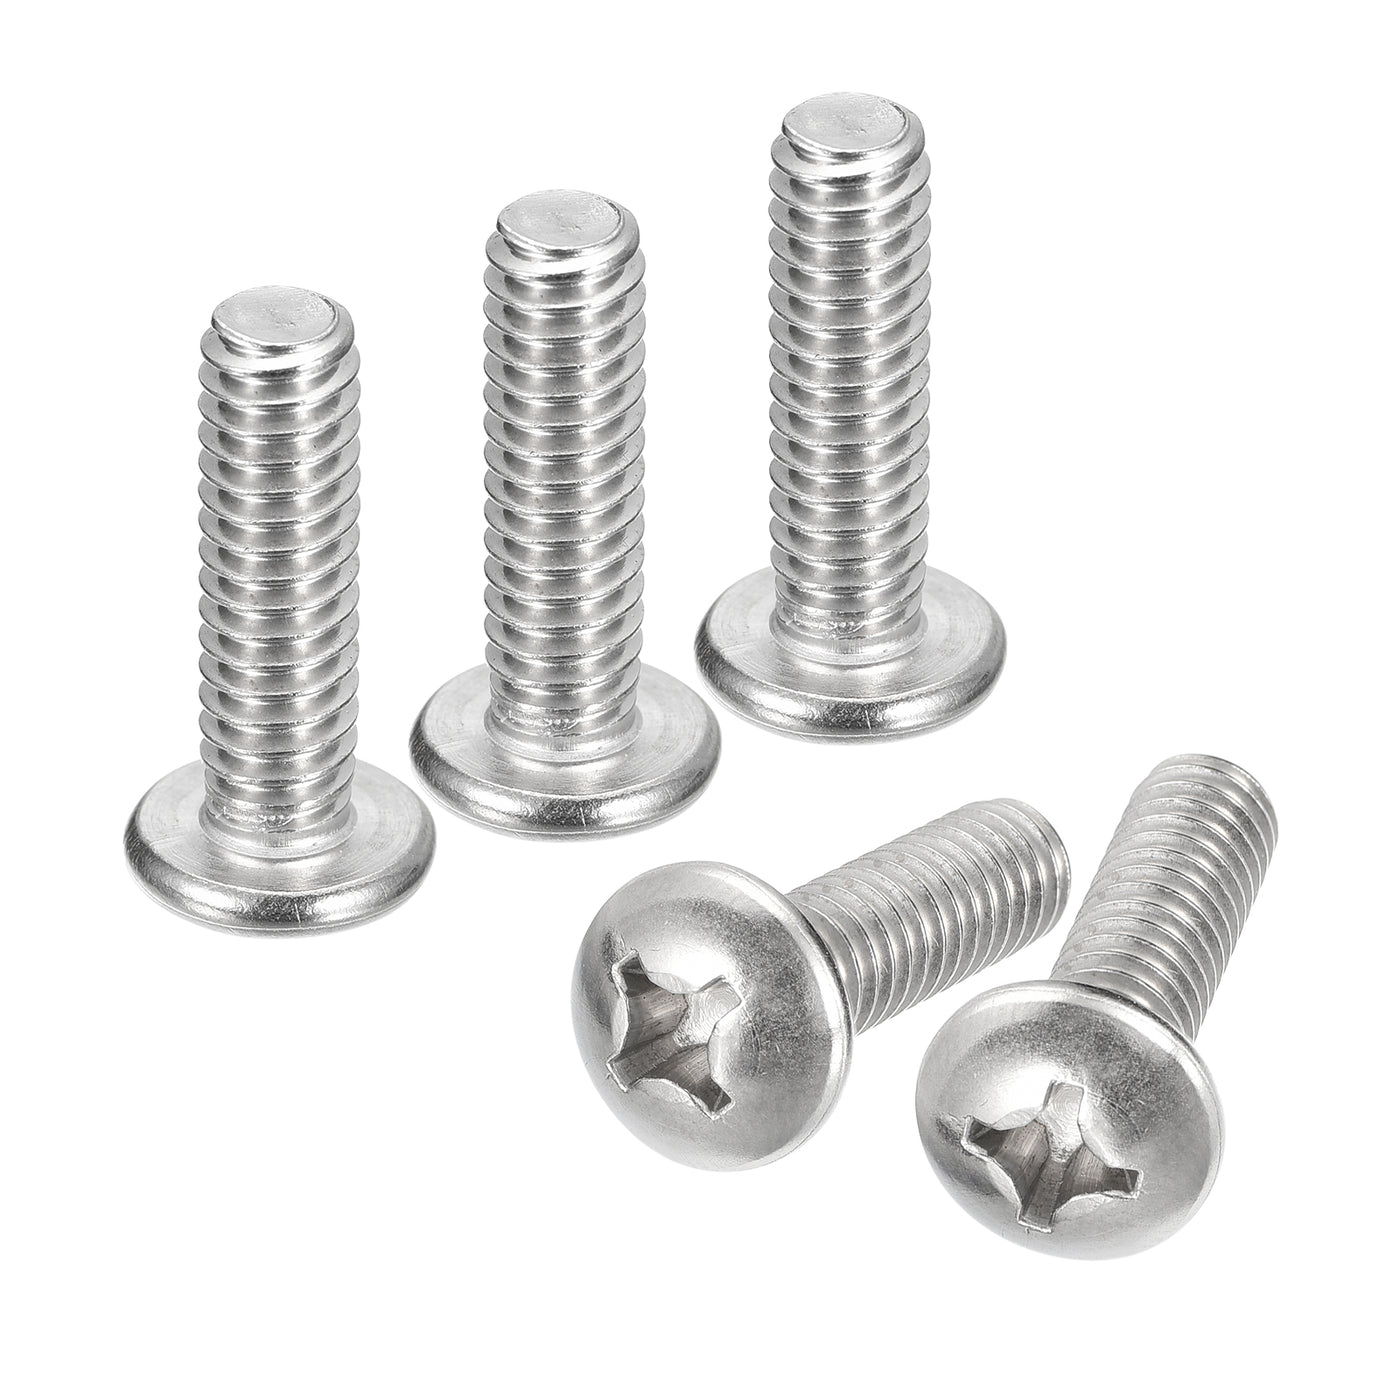 uxcell Uxcell 1/4-20x7/8" Pan Head Machine Screws, Stainless Steel 18-8 Screw, Pack of 50